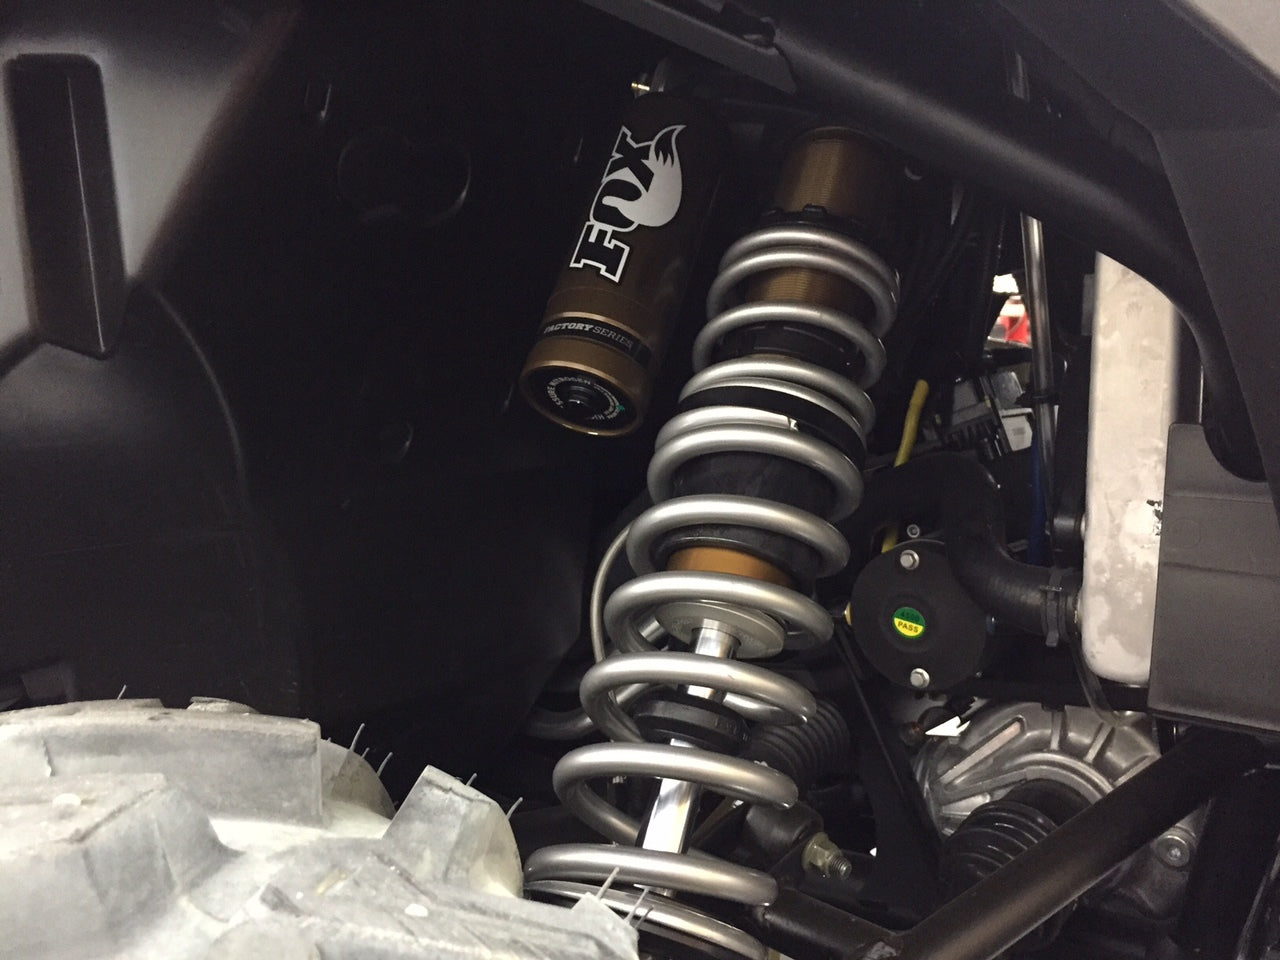 Front shock installed with dual rate springs